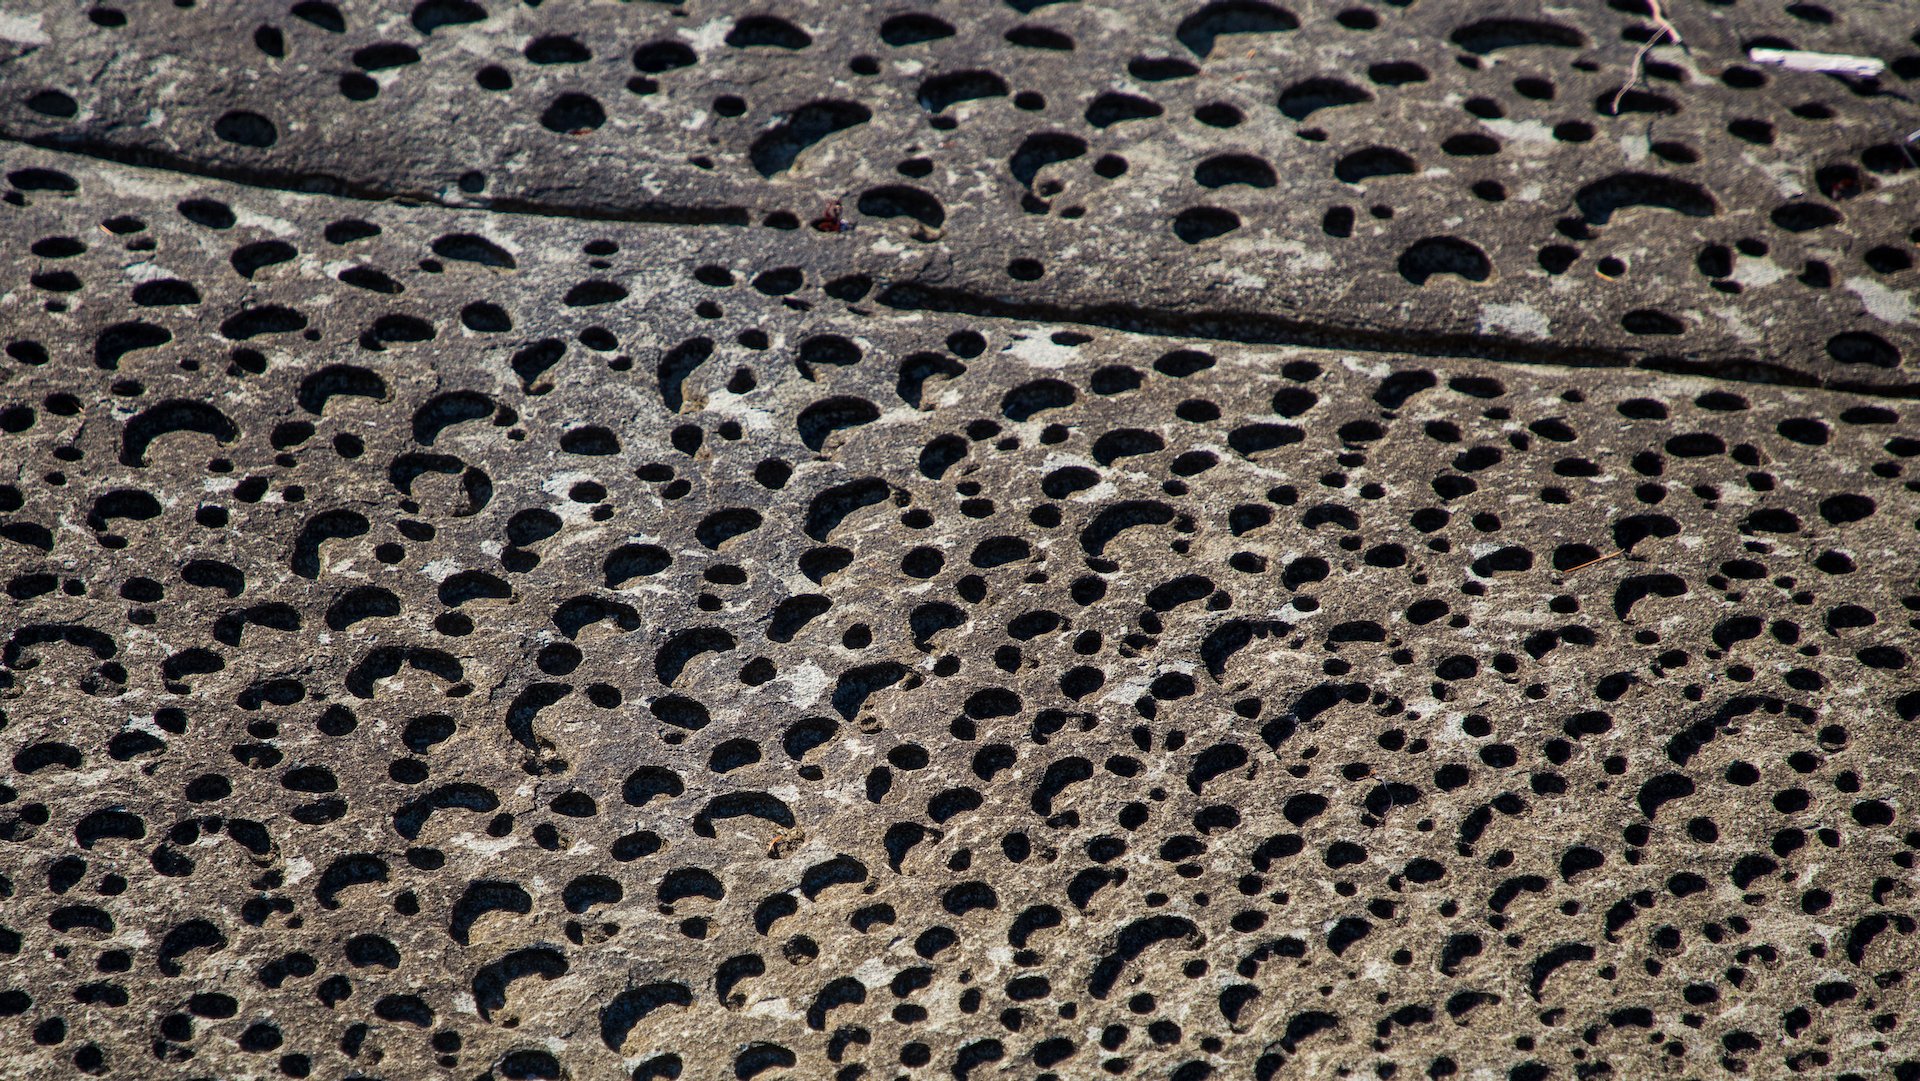  Close up of some of the erosion patterns.  